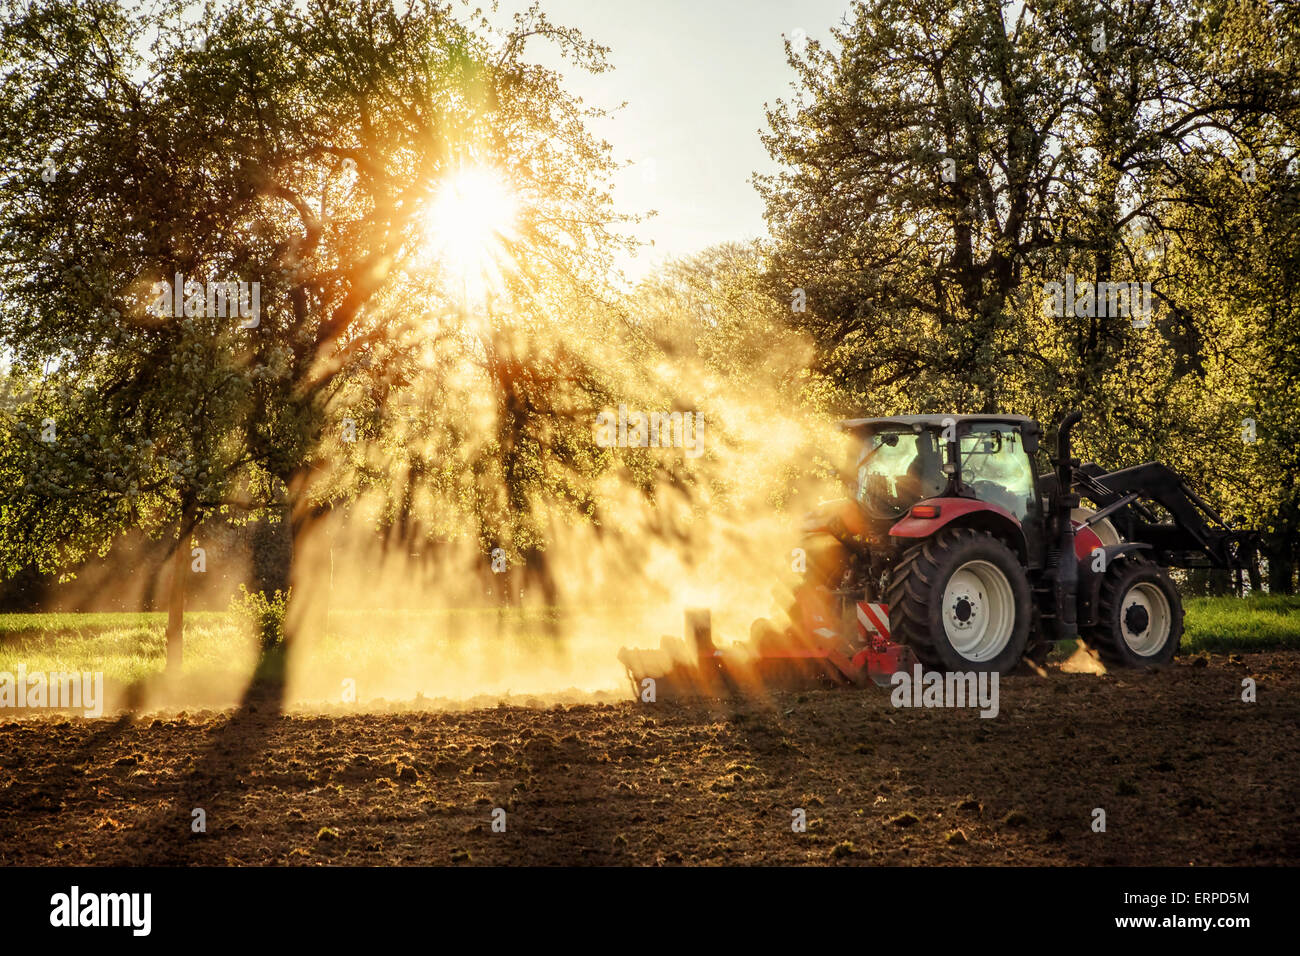 Tractor plowing a field at sunset in beautiful sunlight falling through trees and dust with light and shadow effects, no logos o Stock Photo